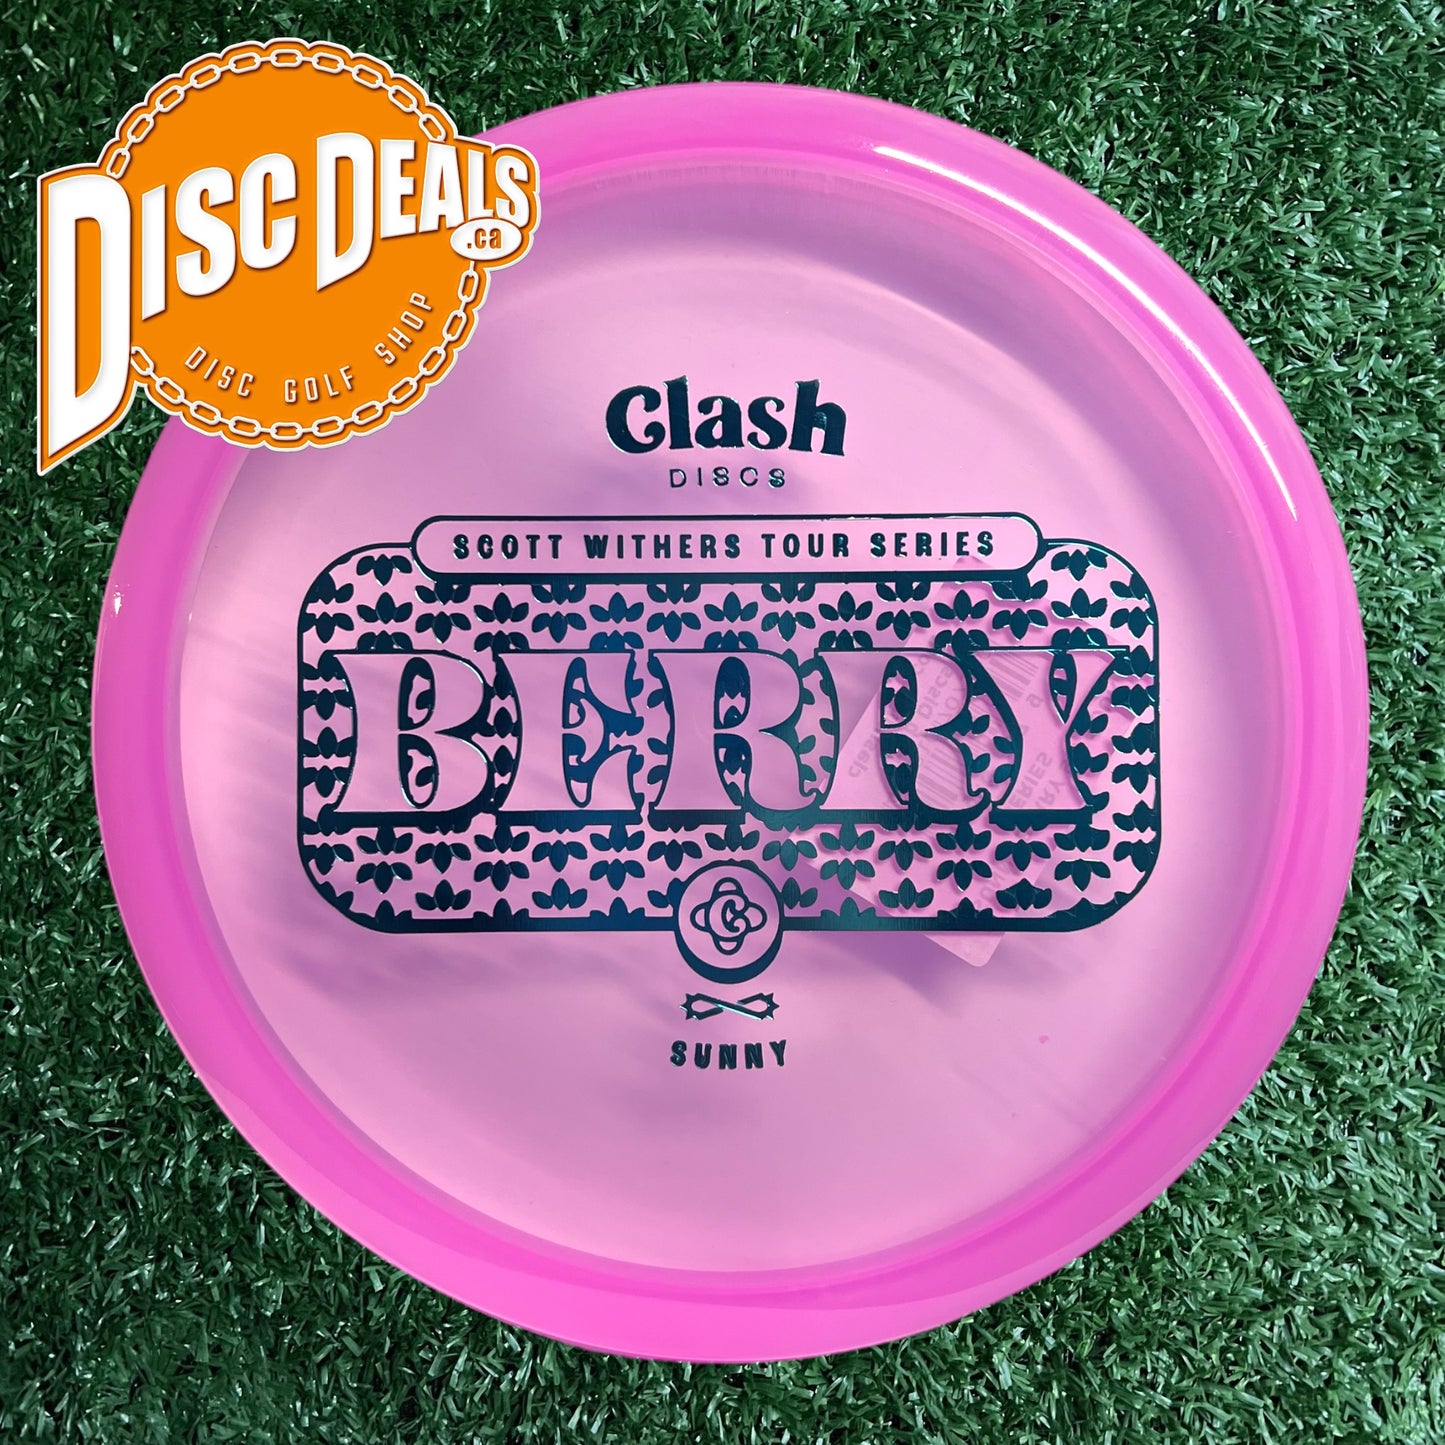 Clash Discs Berry - Sunny - Scott Withers Tour Series